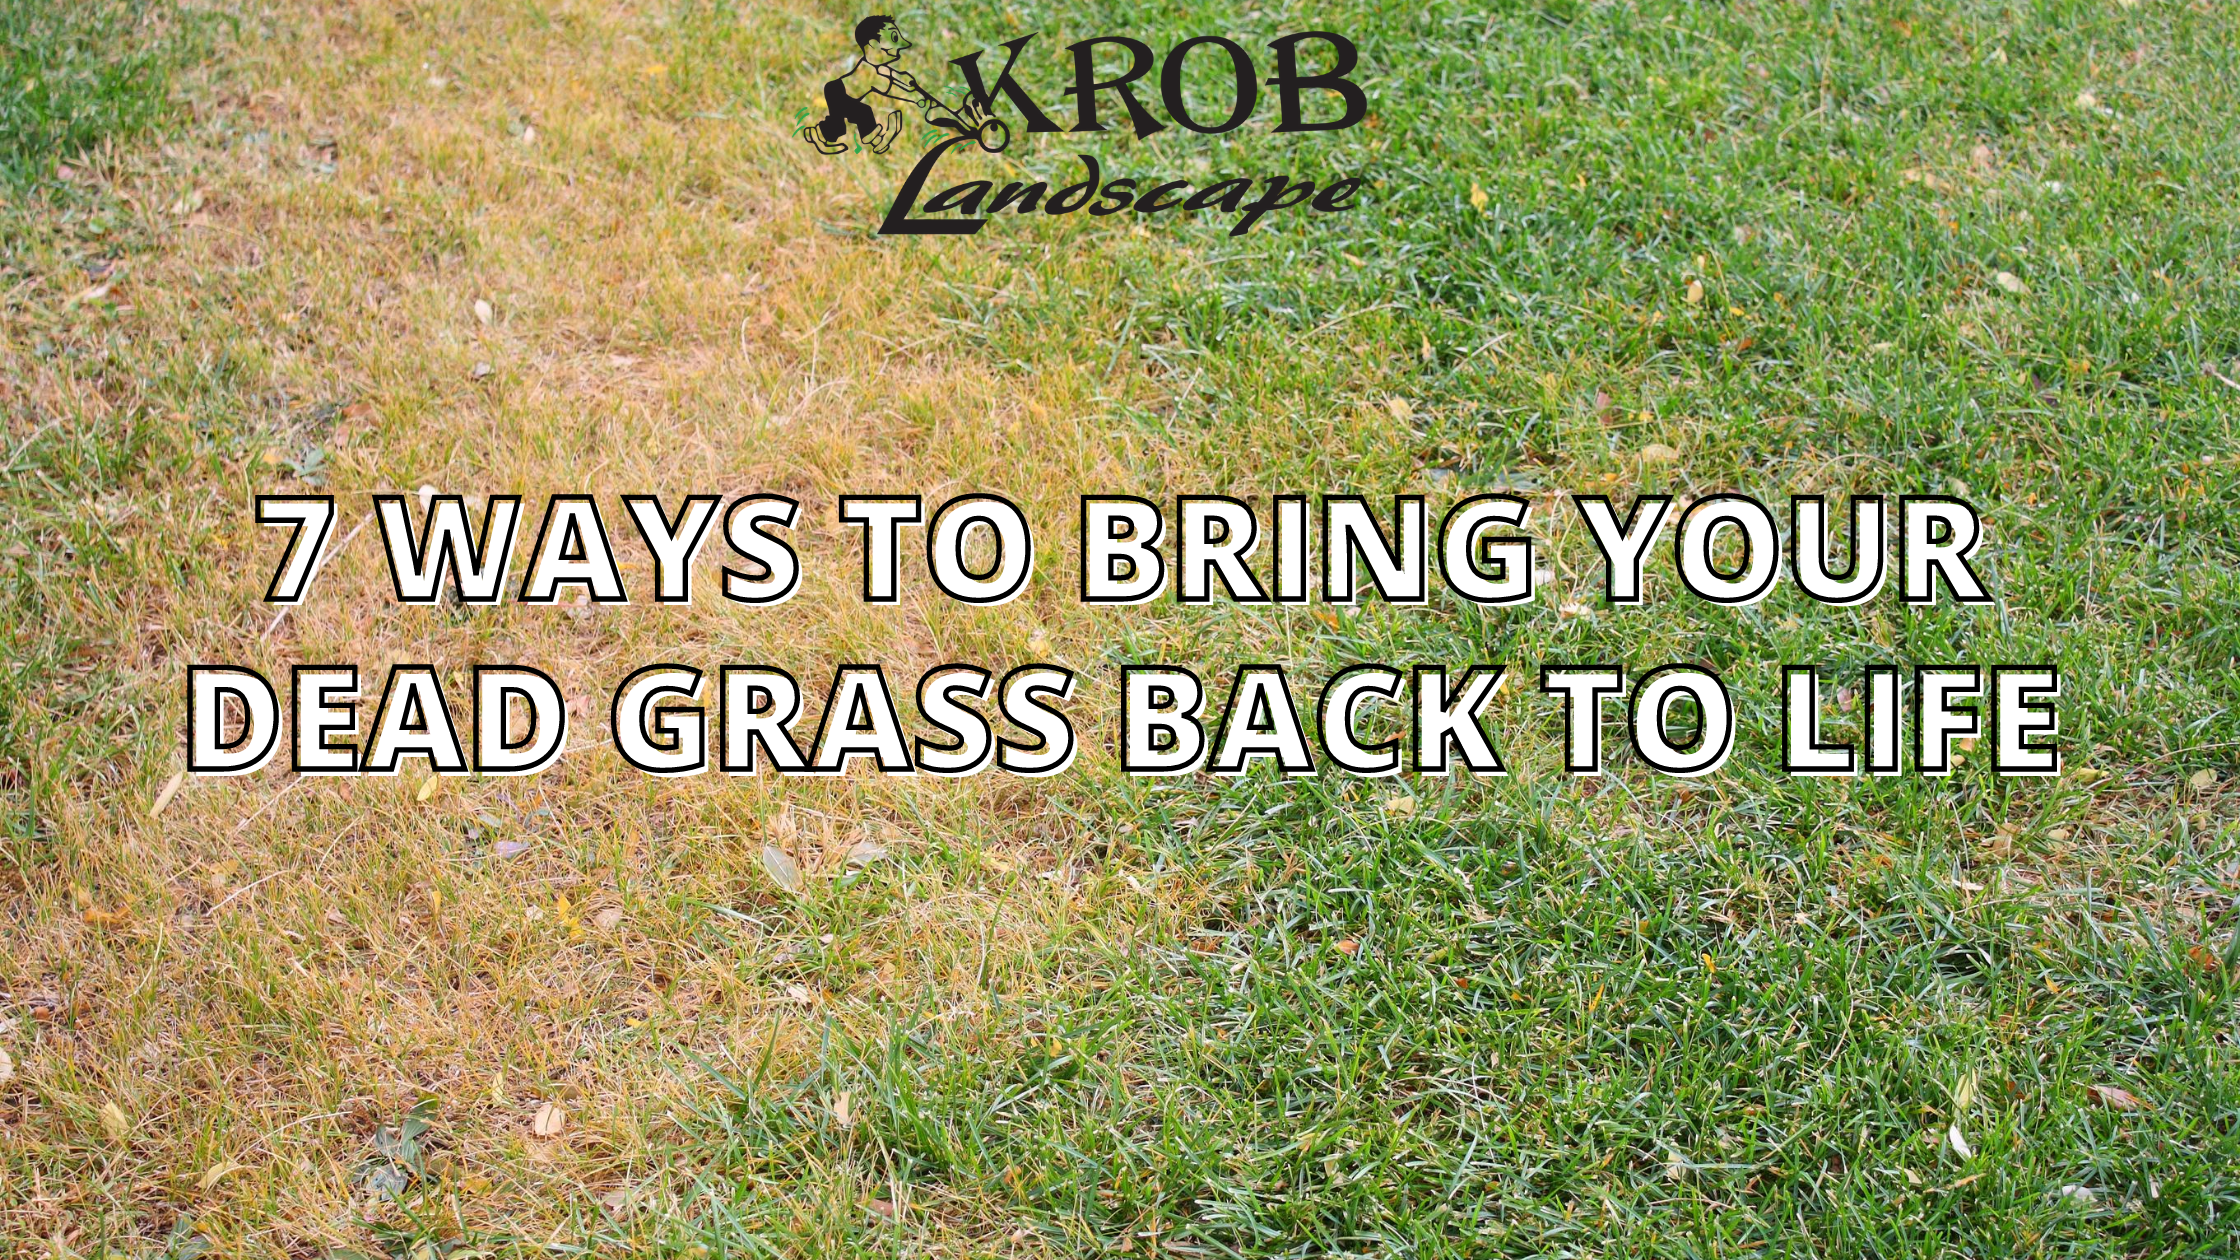 7 ways to bring your dead grass back to life.png